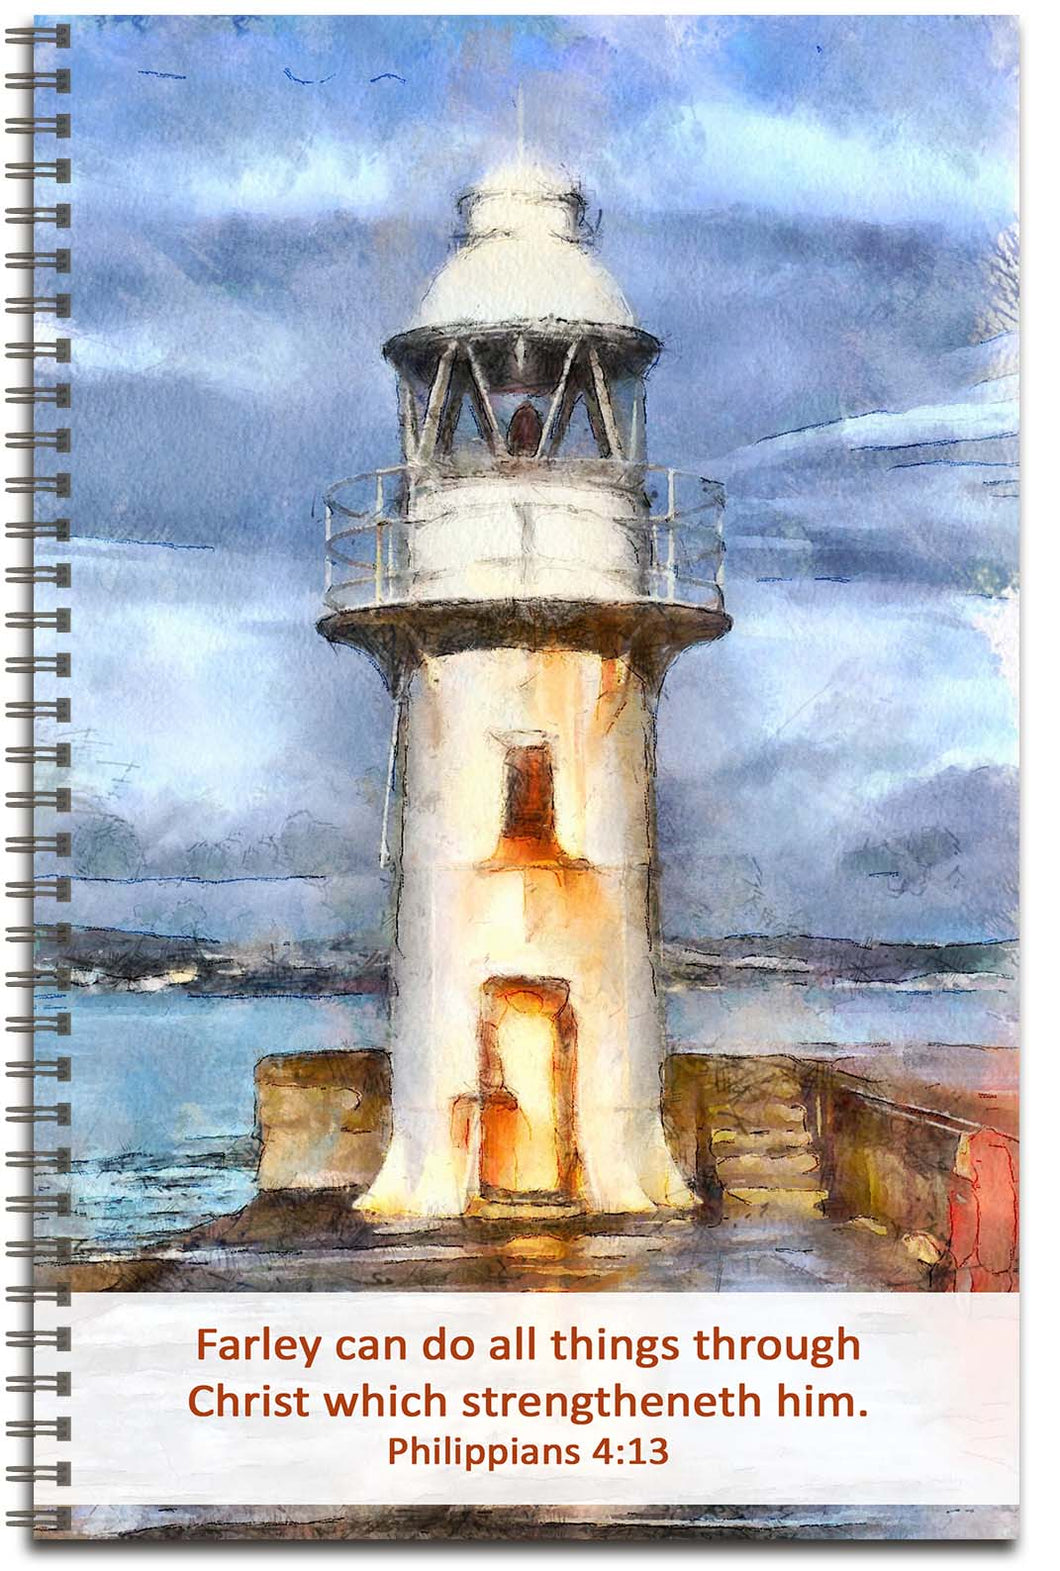 Guiding Light - Personalized Journal